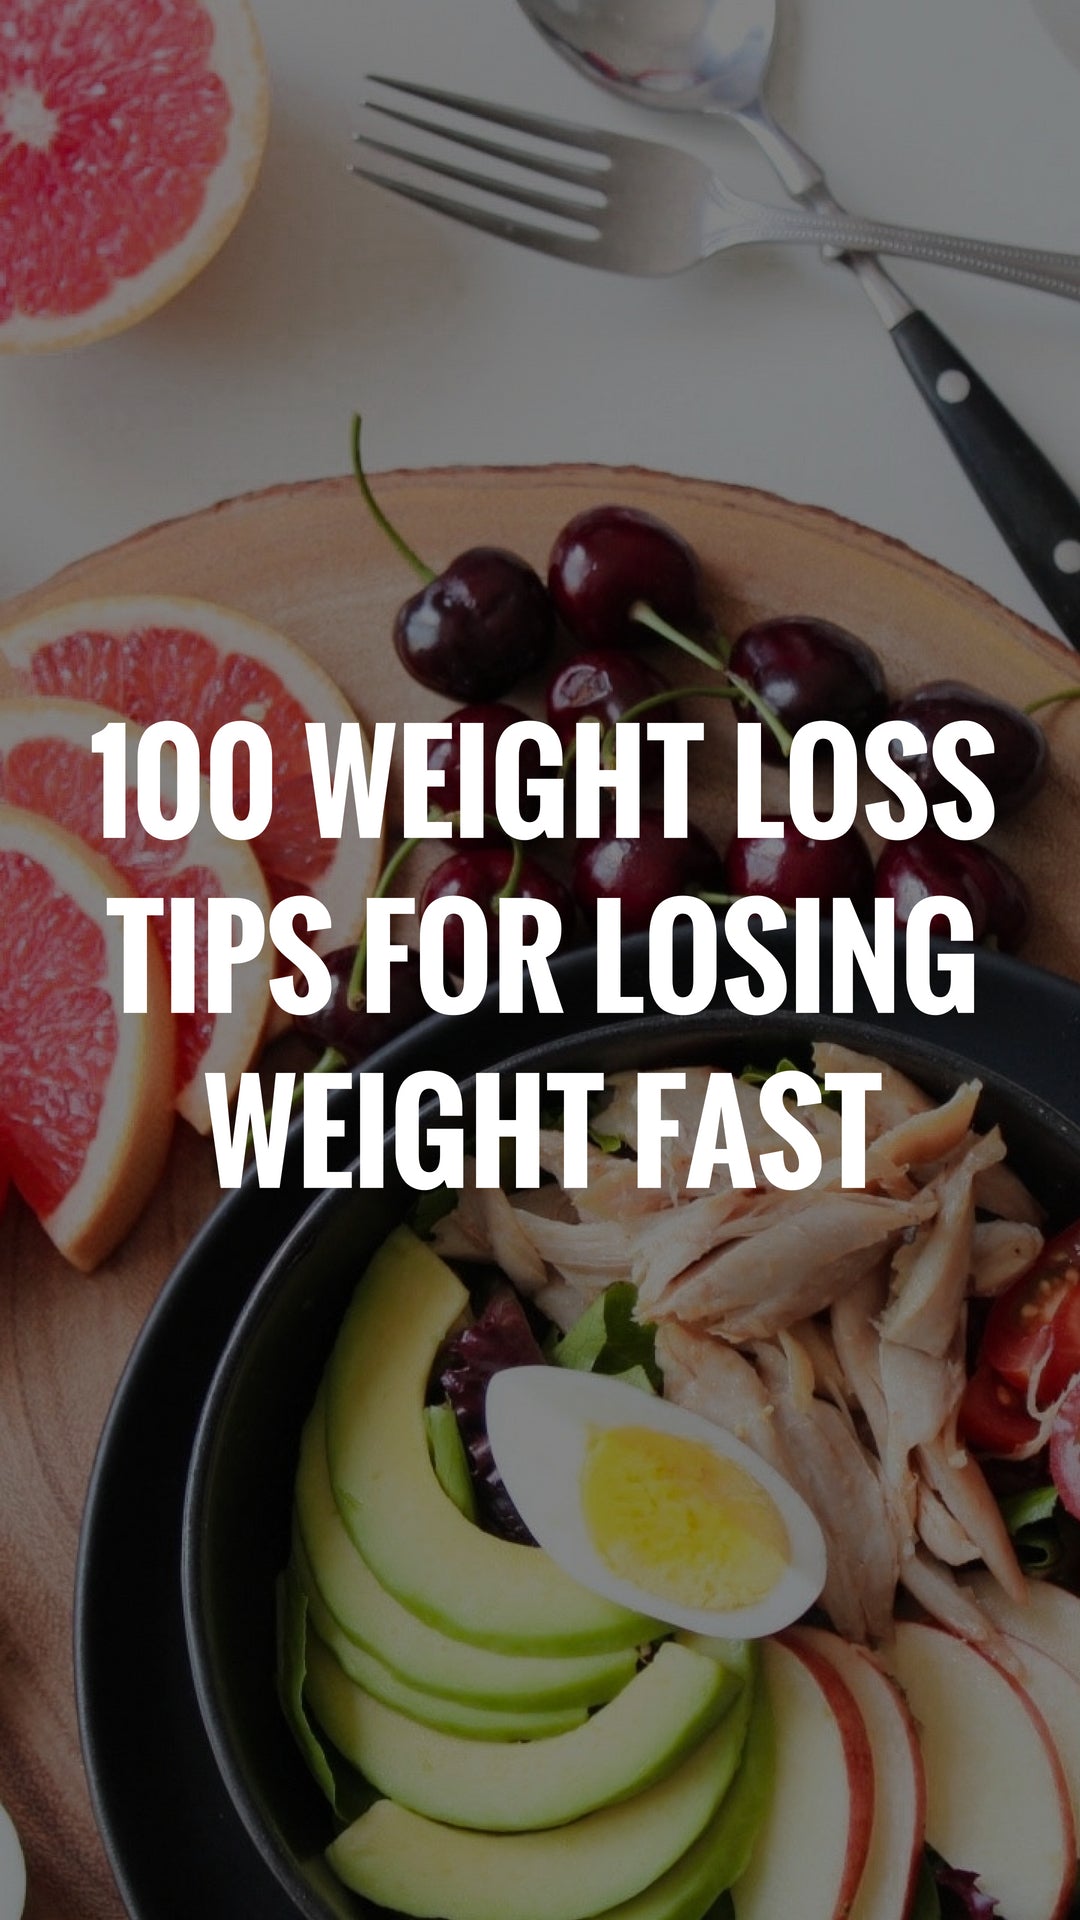 100 Weight Loss Tips For Losing Weight Fast